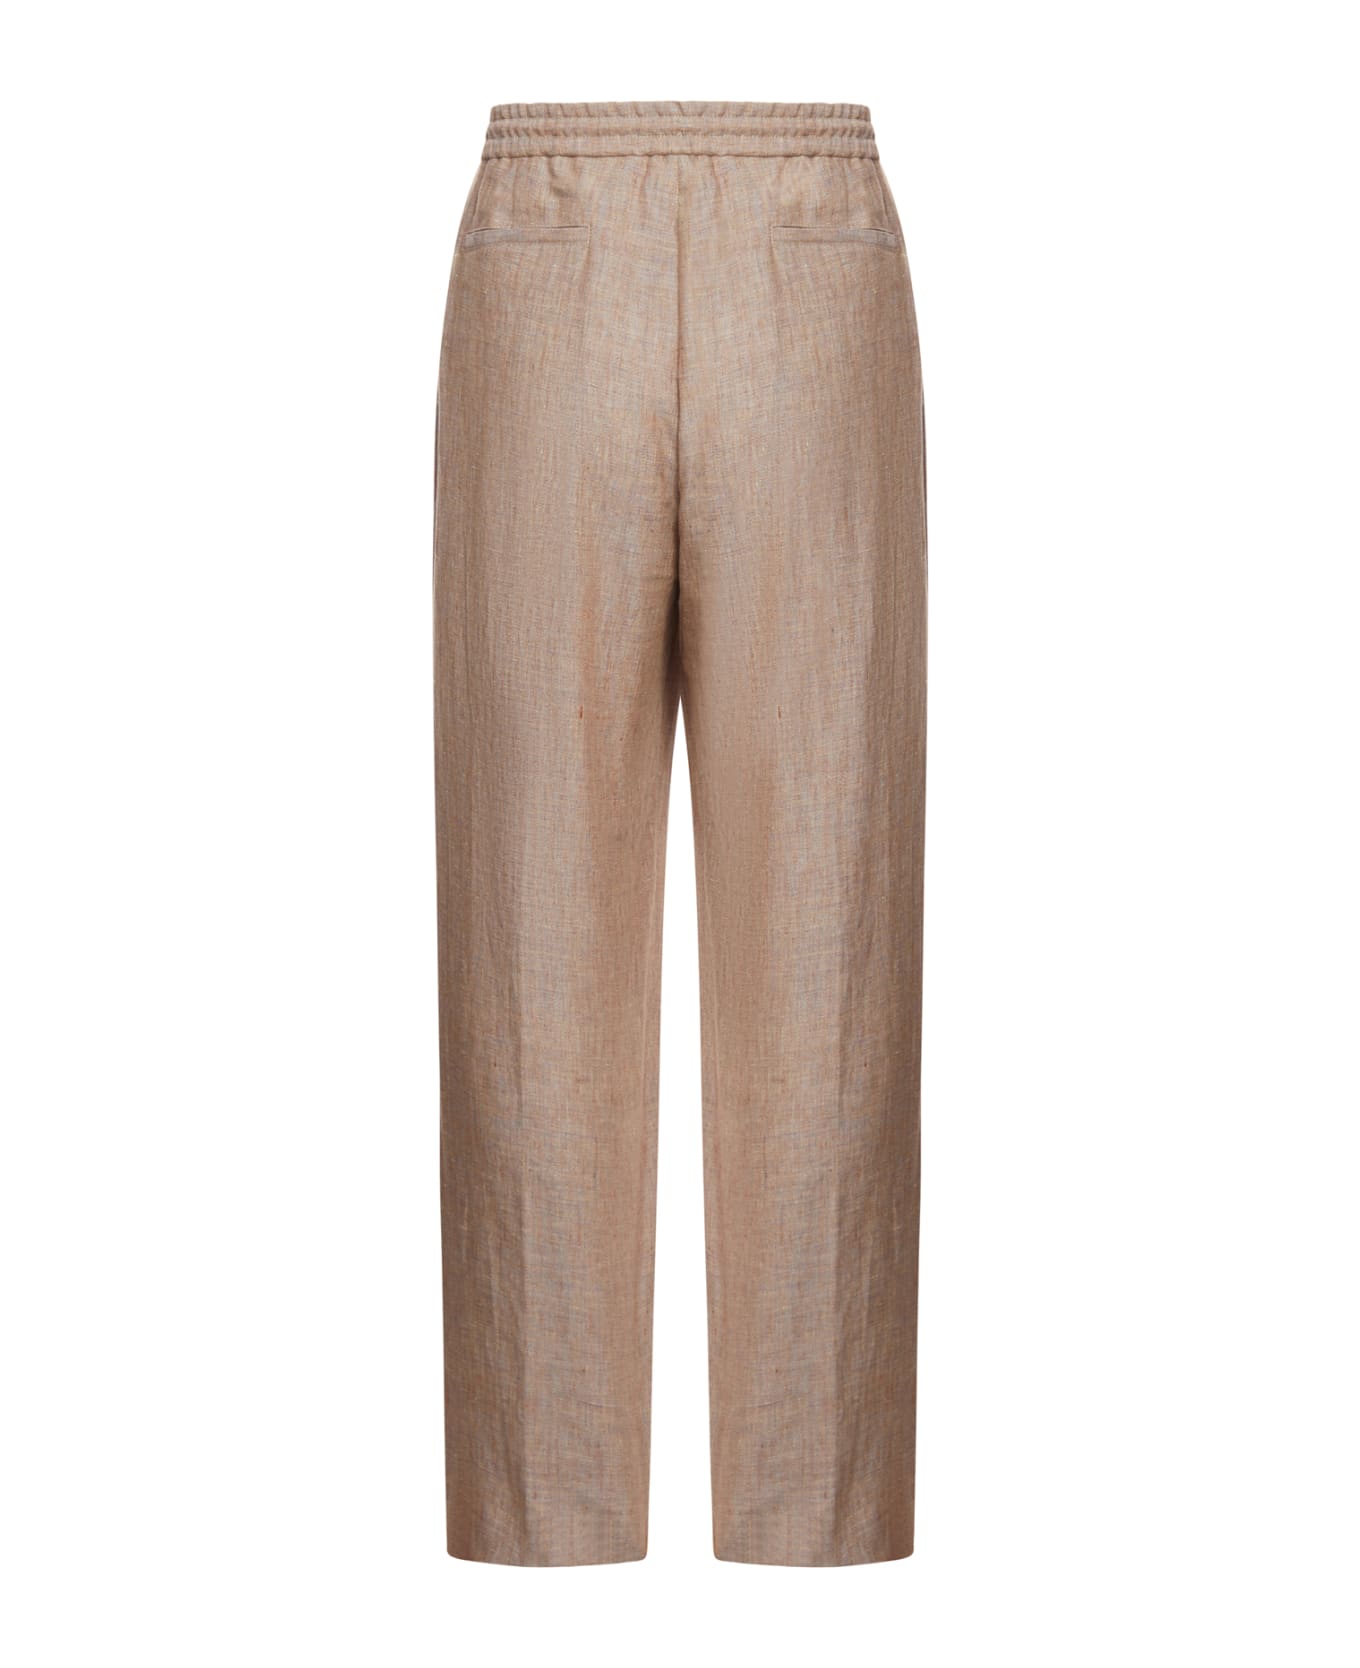 Etro Trousers W/ Coulisse - Beige